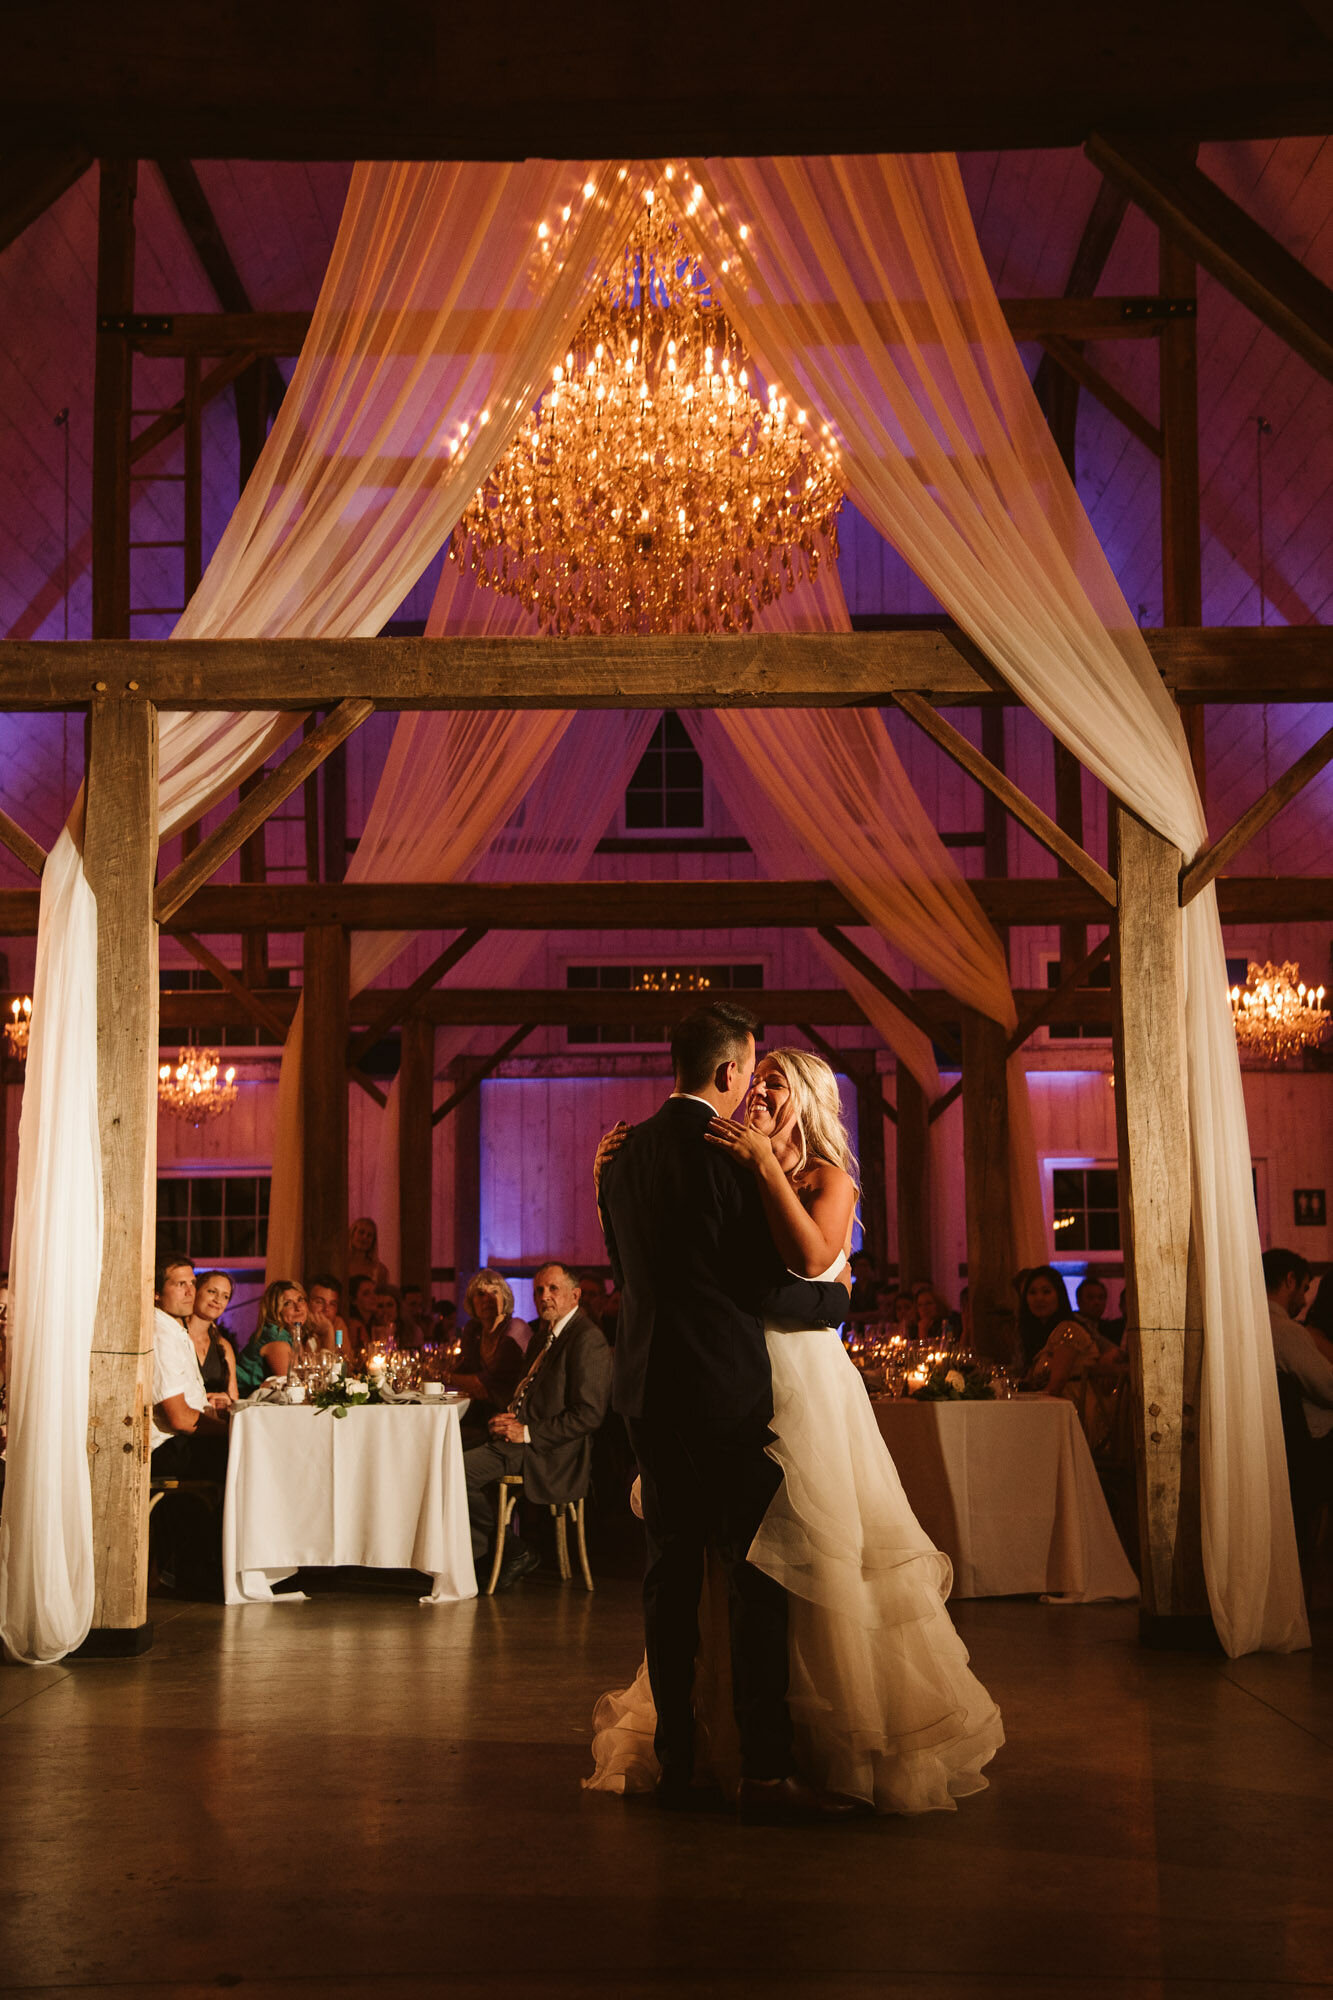 First dance between bride and groom inside decorated country barn at Stonefields Estate